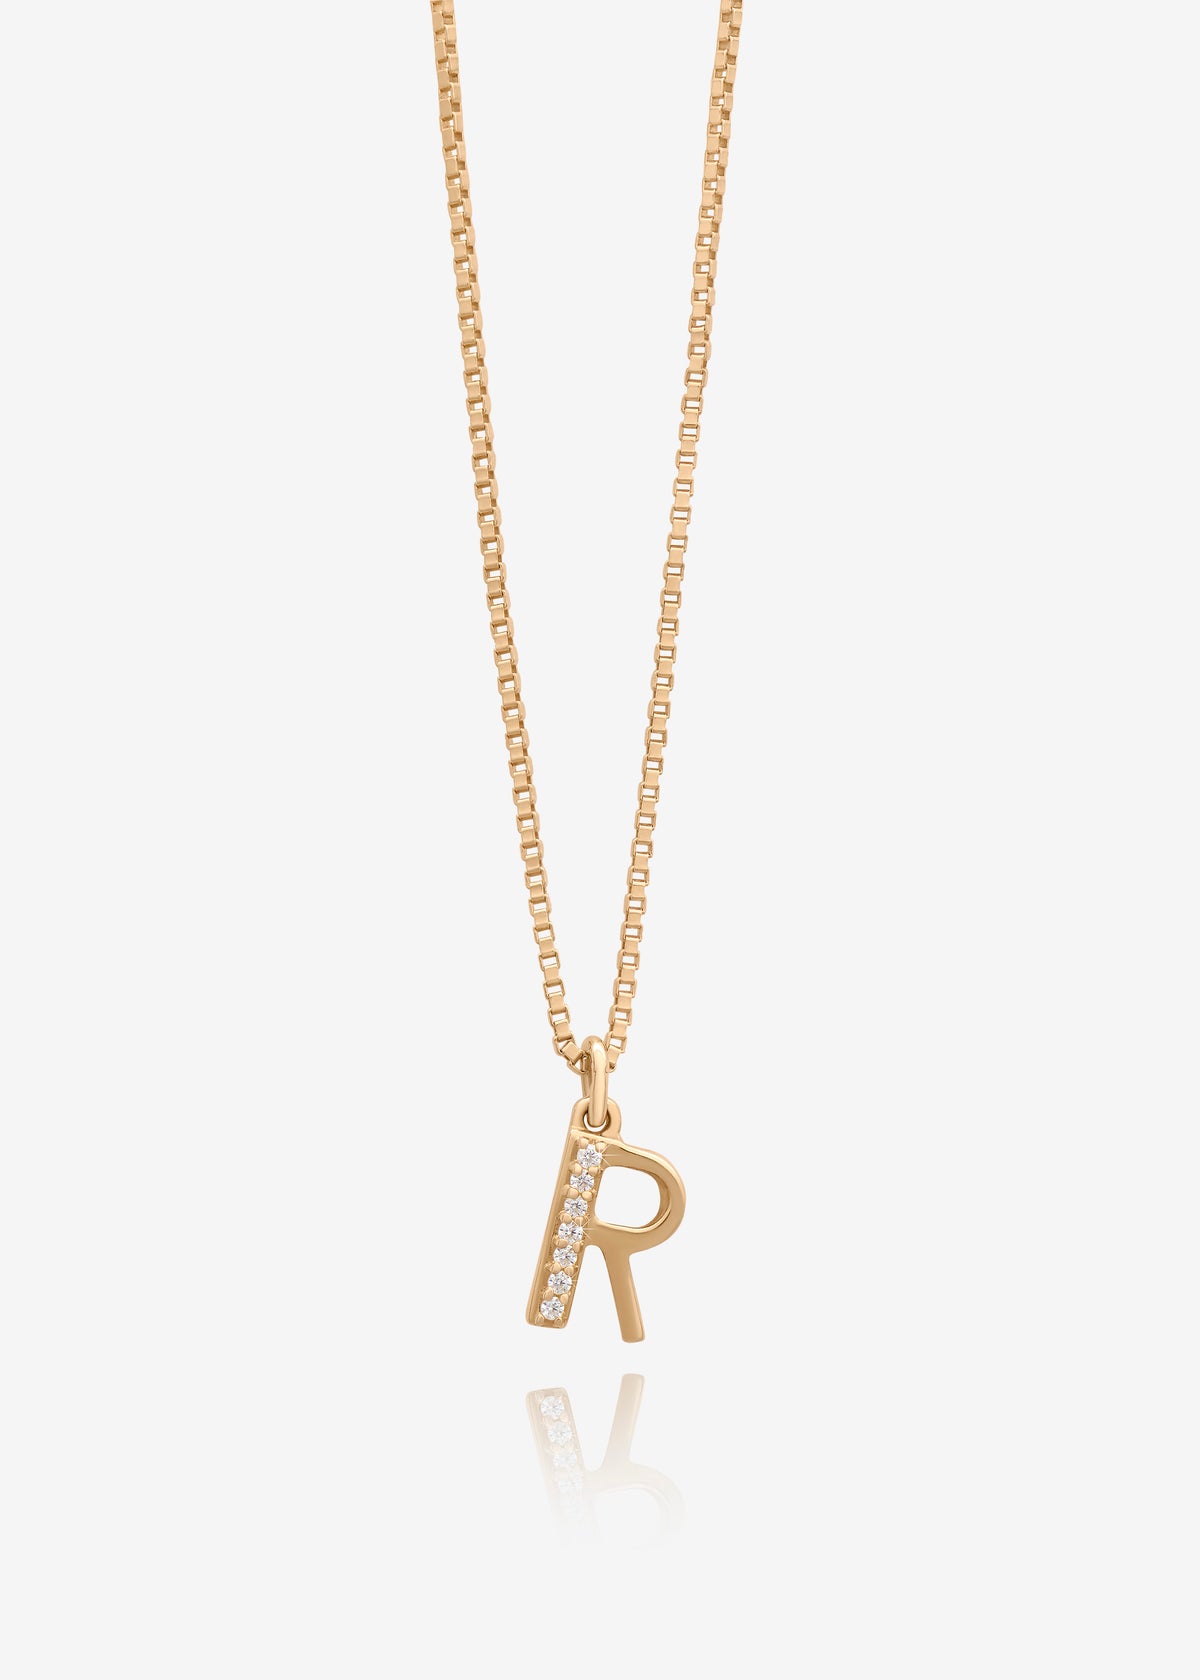 Solid Gold and Diamond Initial Necklace